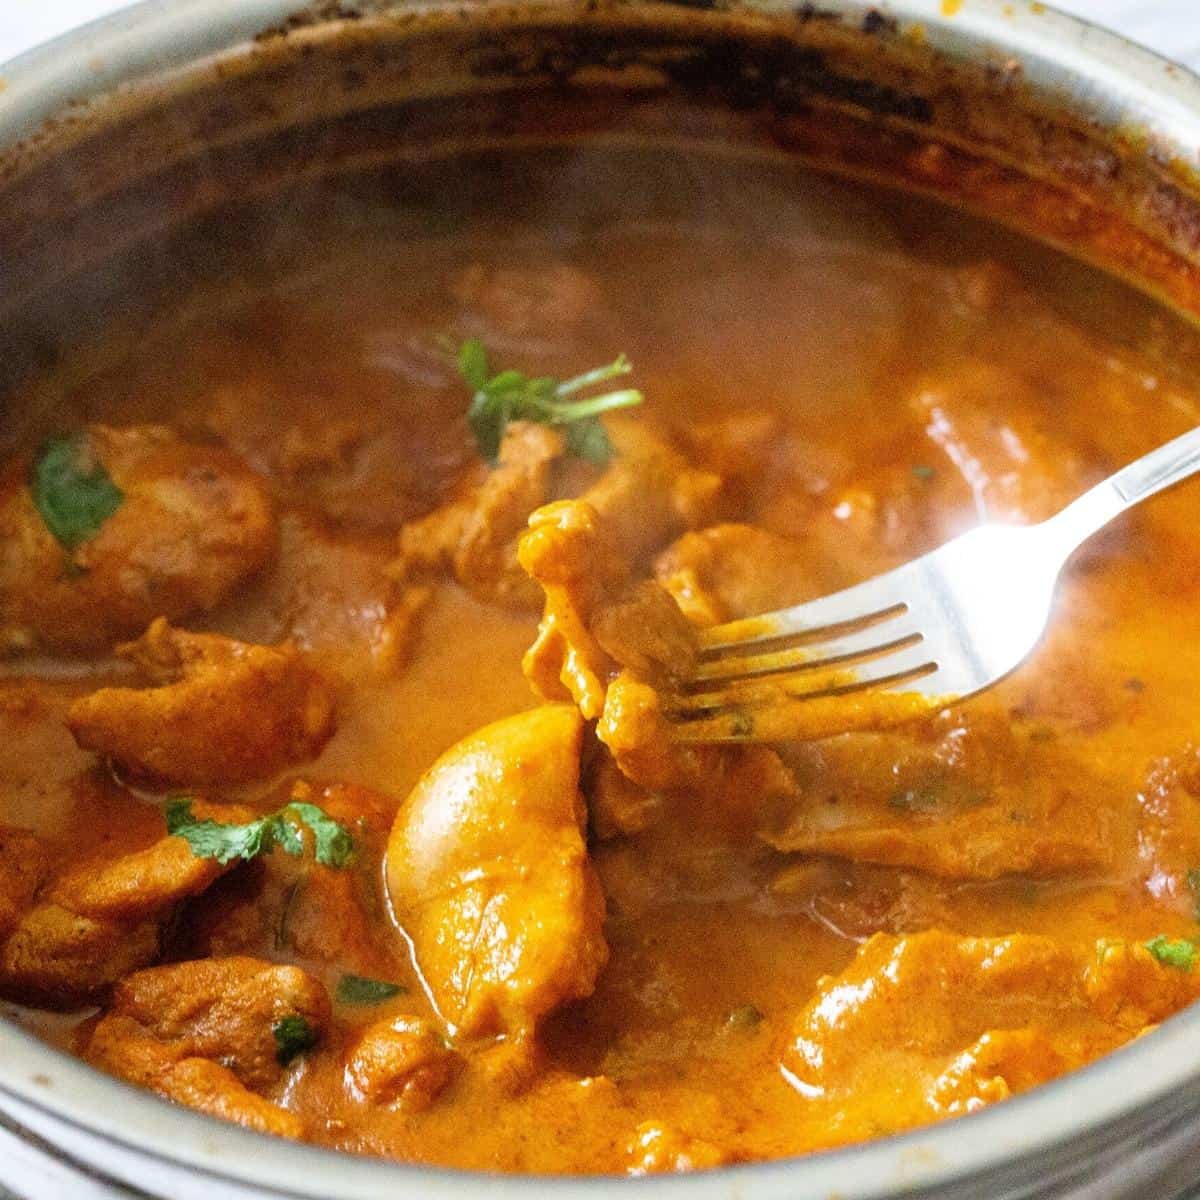 A steaming pot of curry and a fork.